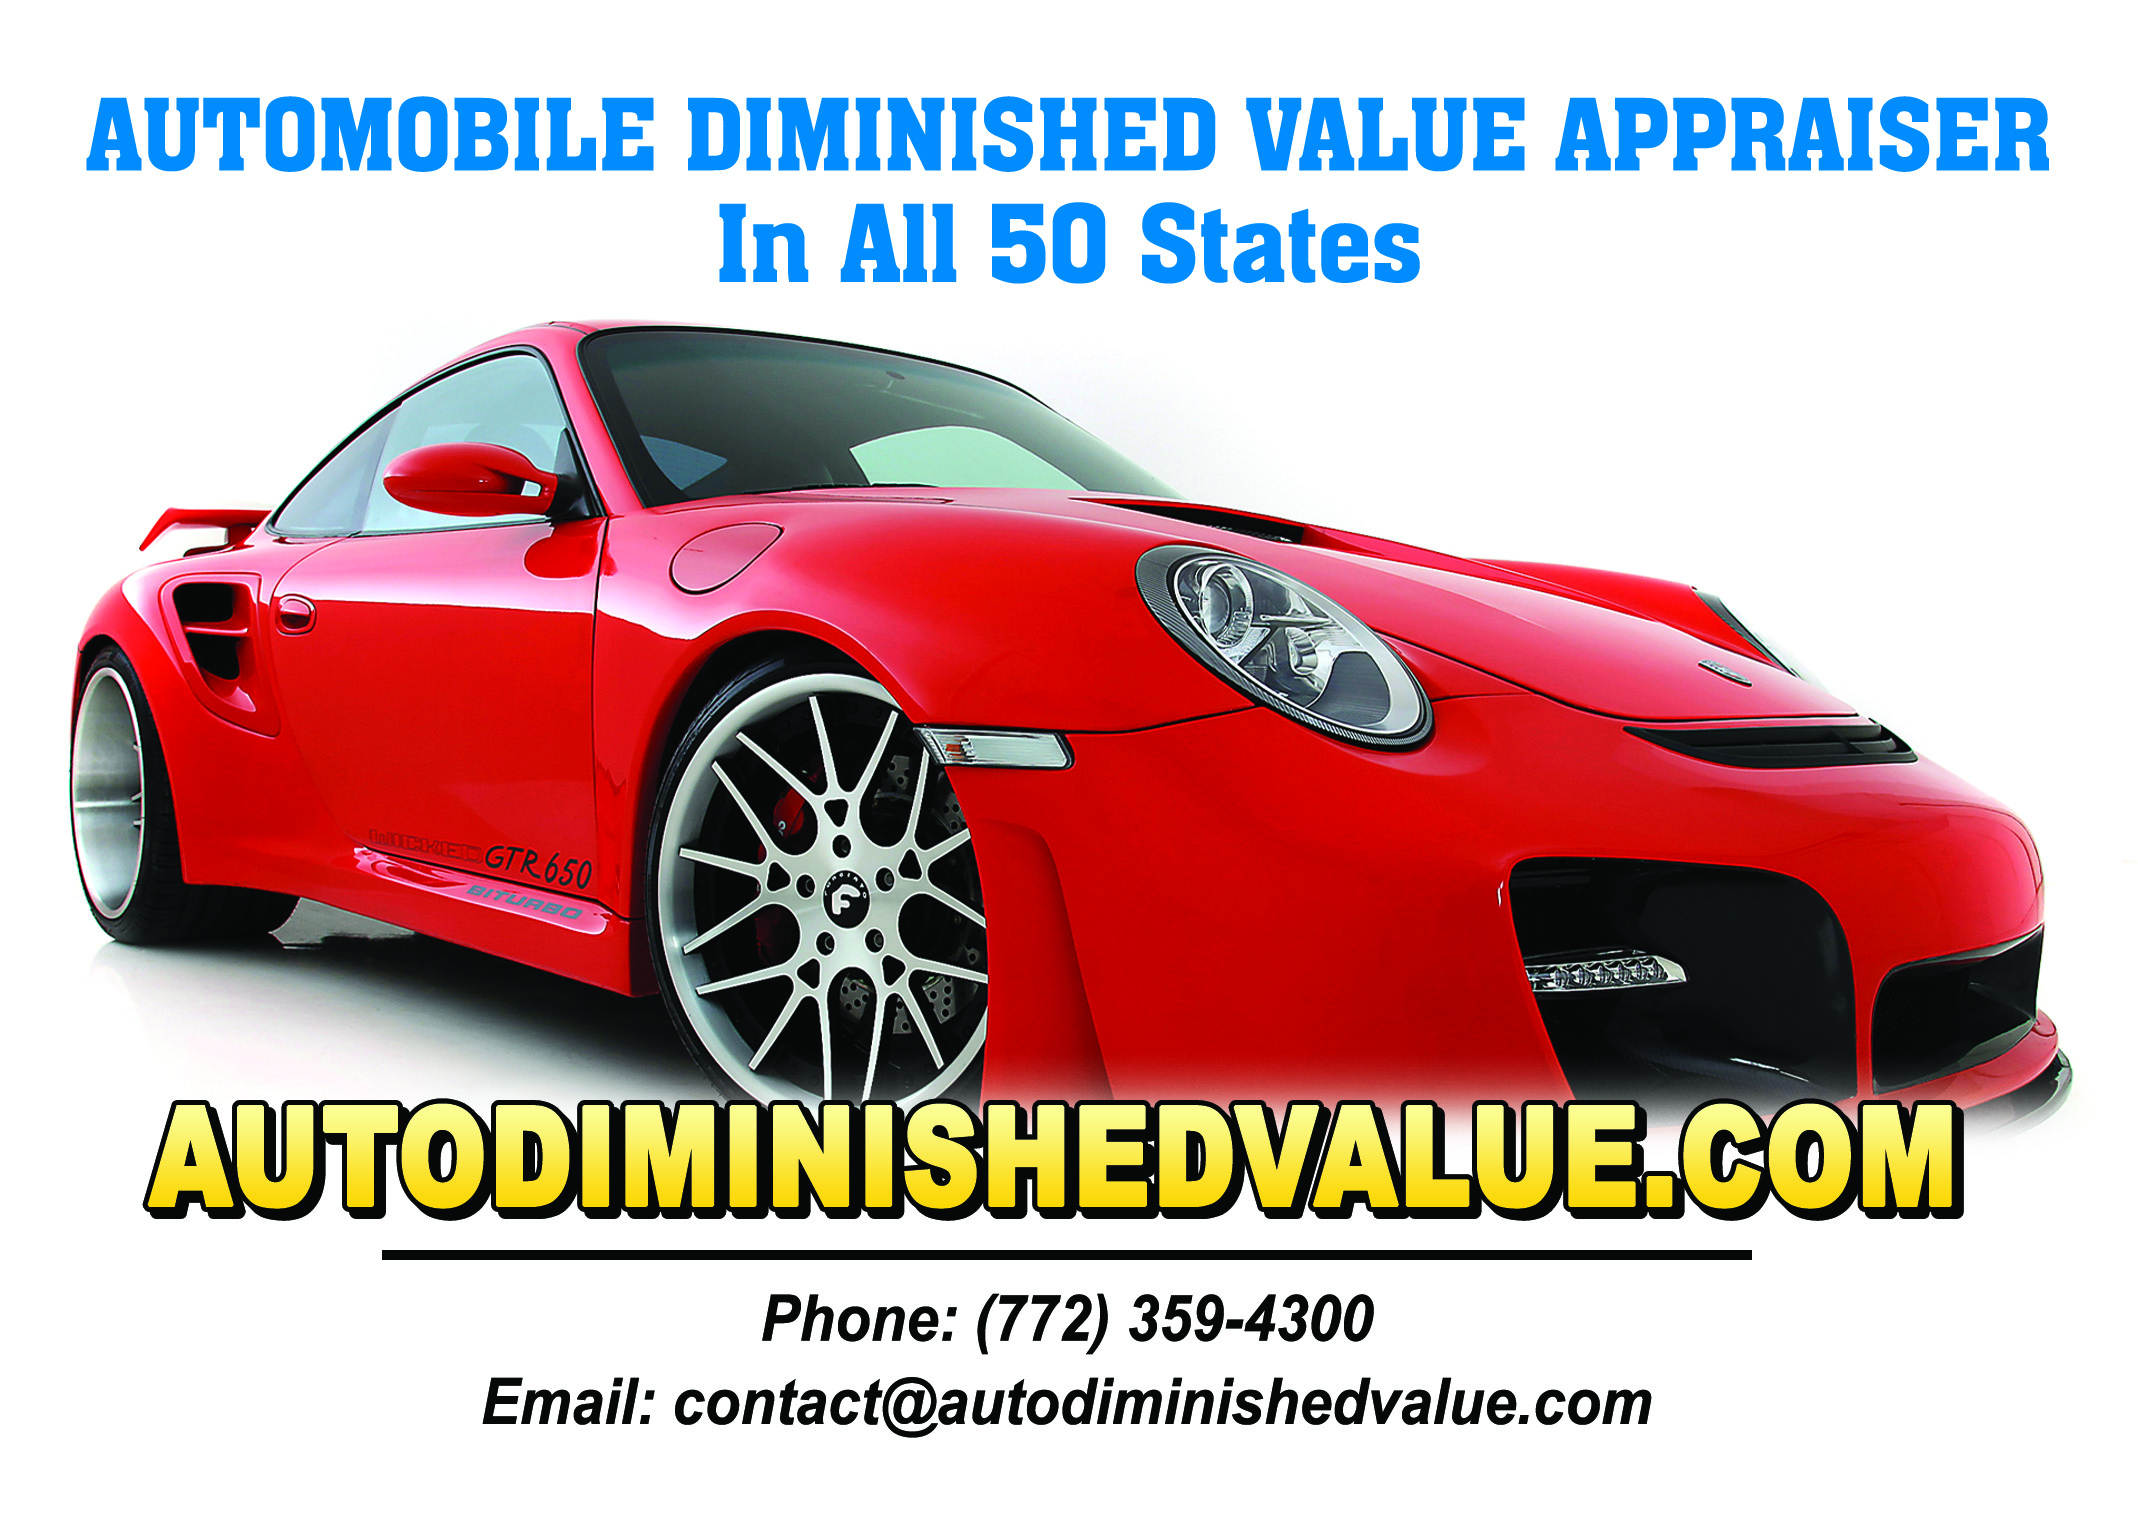 Auto Diminished Value Report $275.00